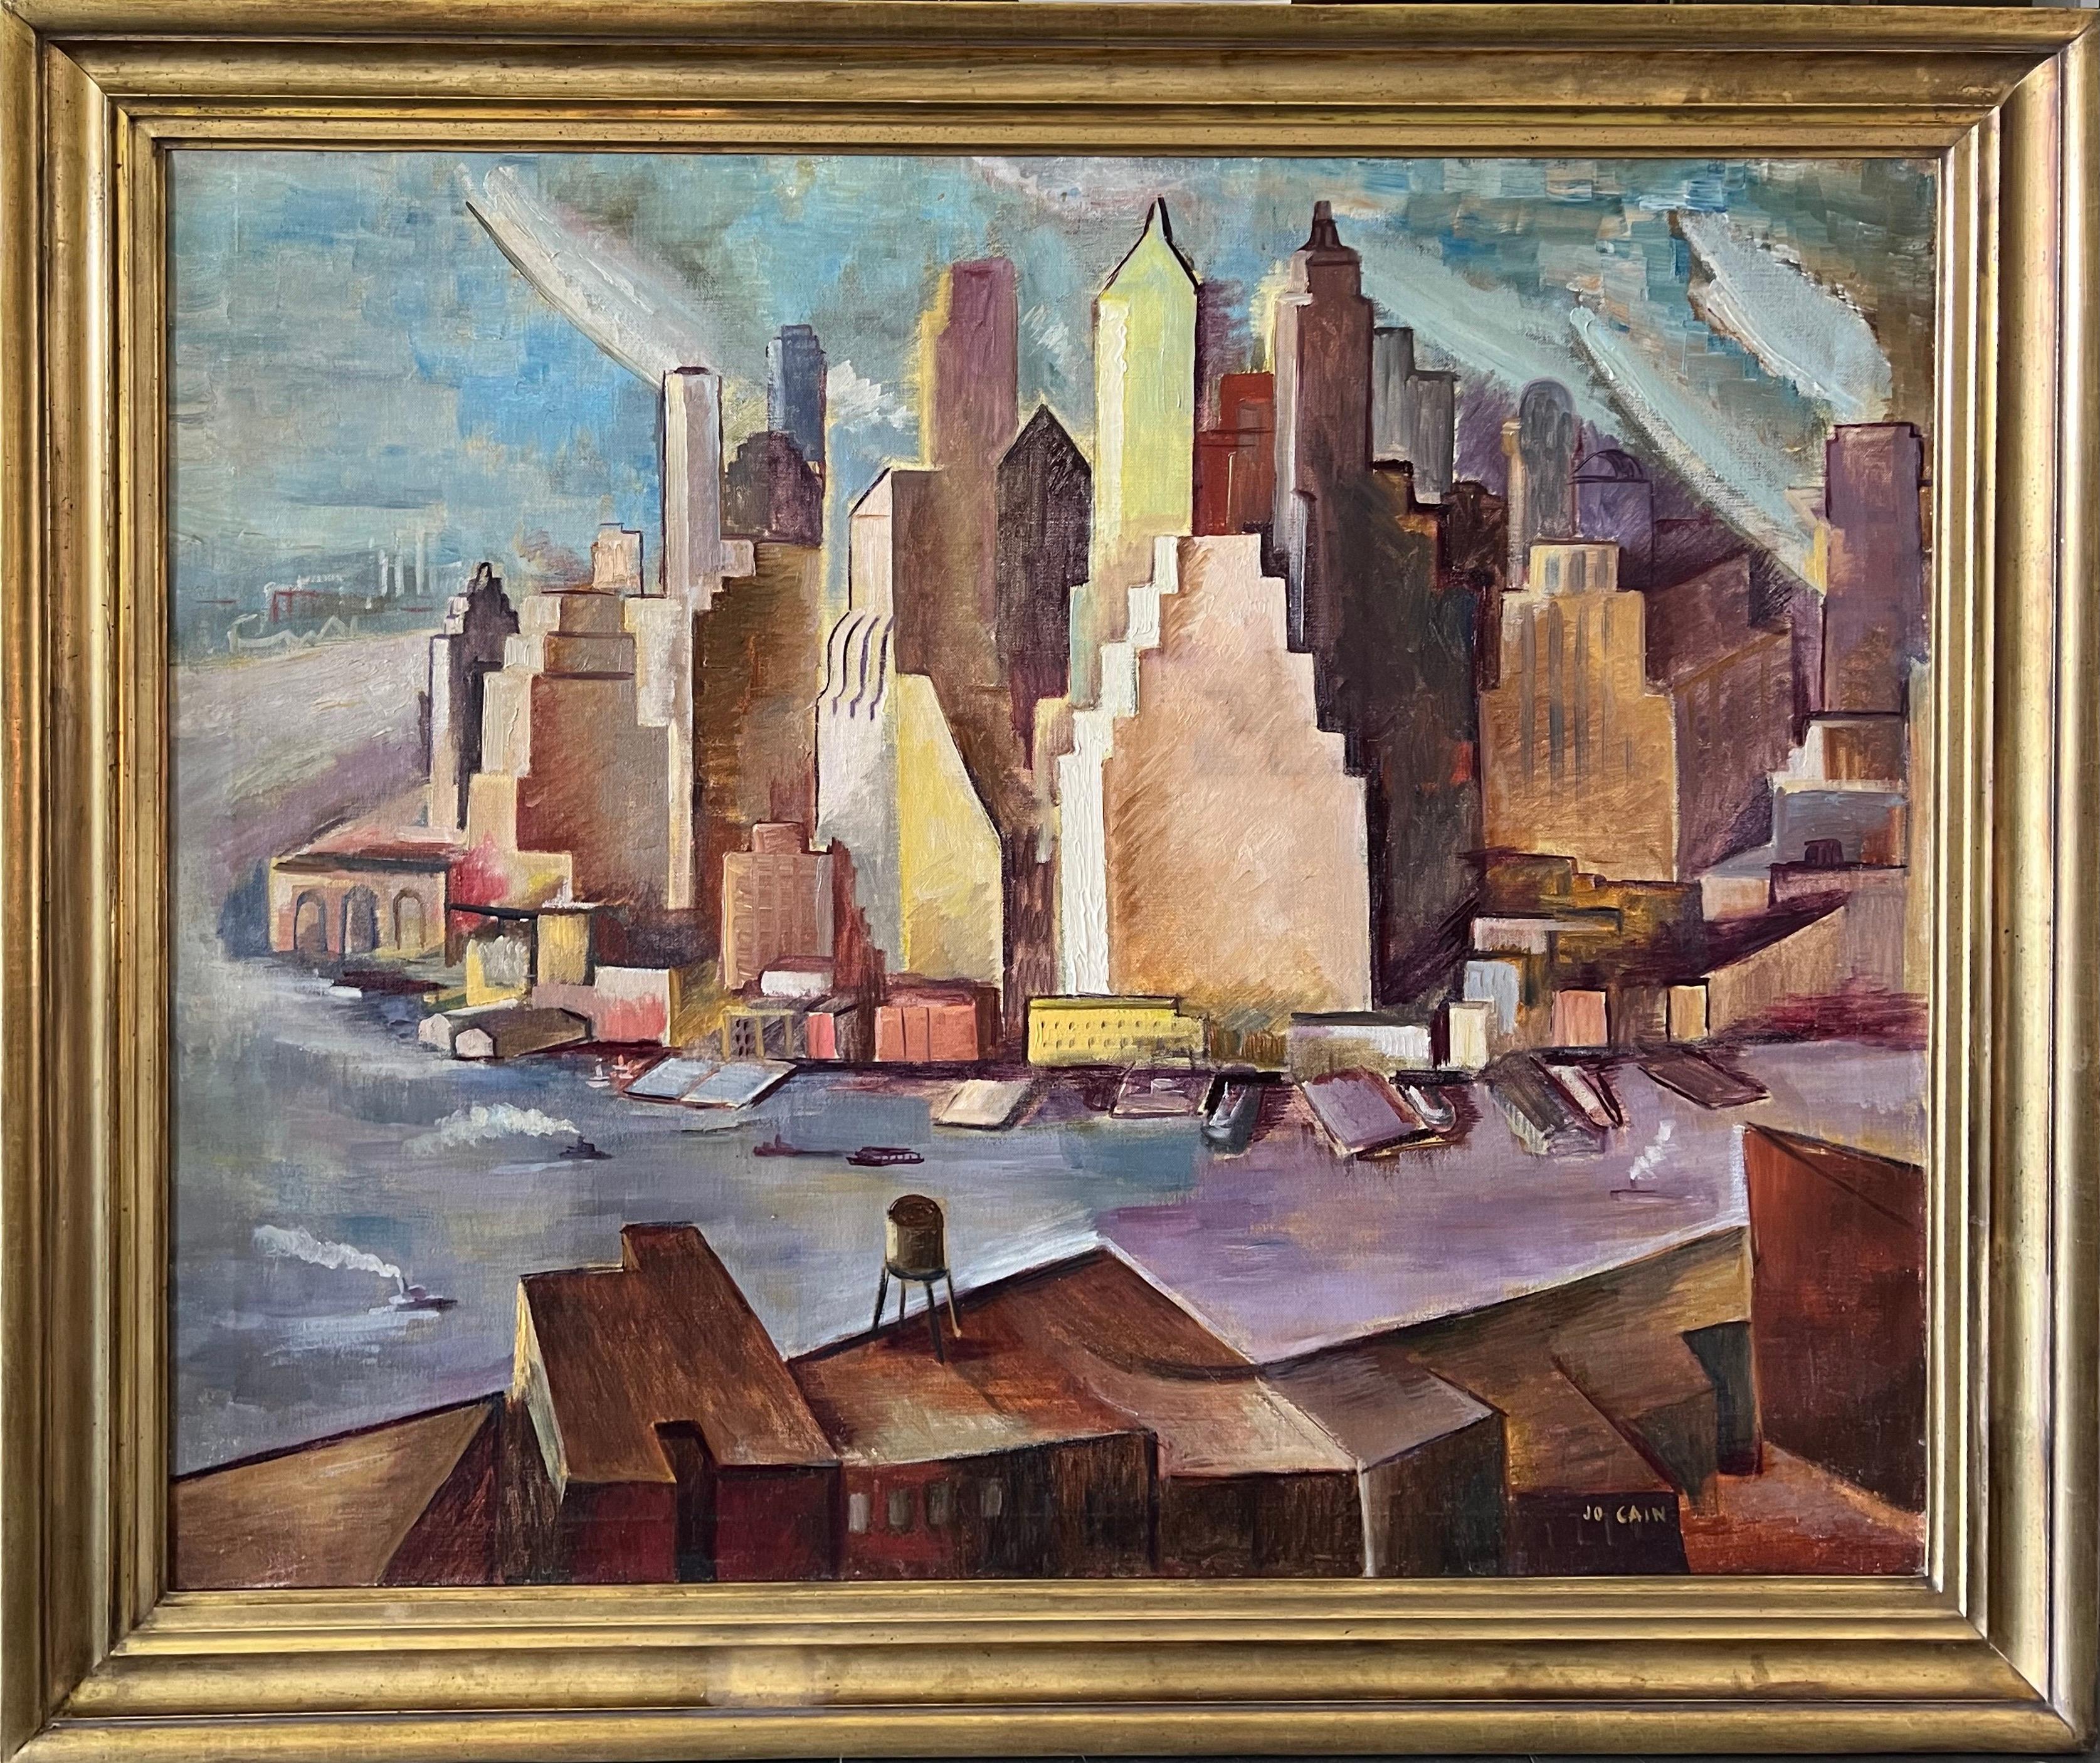 Jo Cain Landscape Painting - Lower Manhattan American Modernism NYC Cityscape Social Realism WPA 20th Century